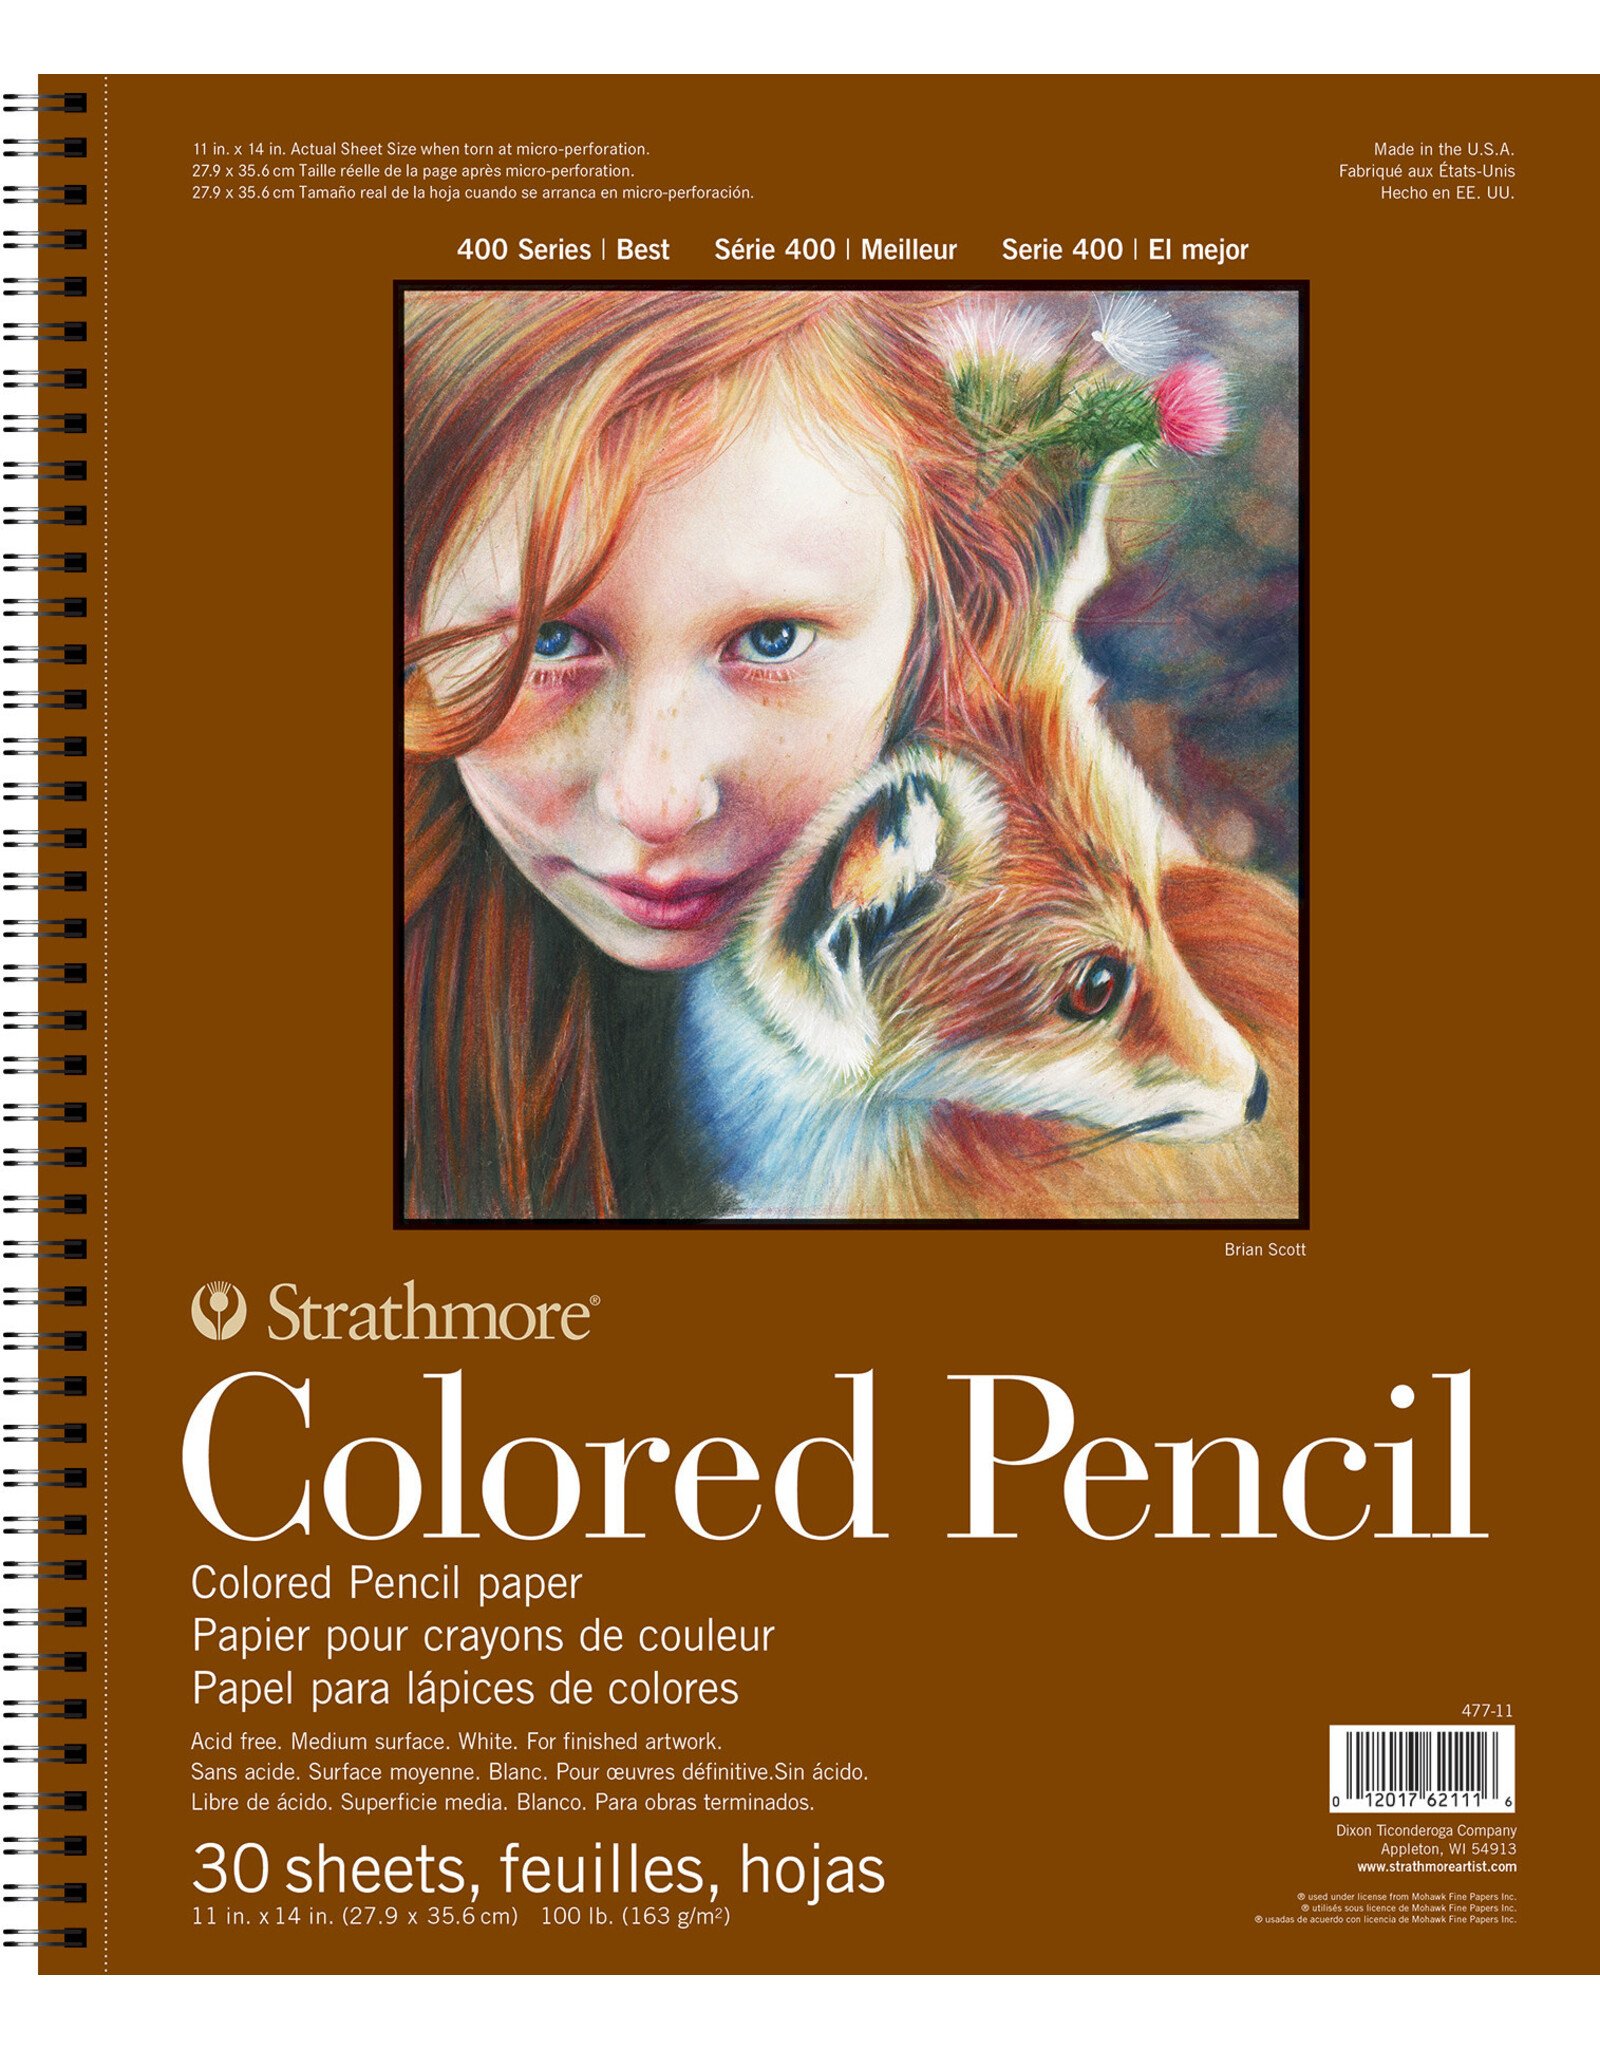 Strathmore Strathmore 400 Series Colored Pencil Pad, 30 Sheets, 11” x 14”